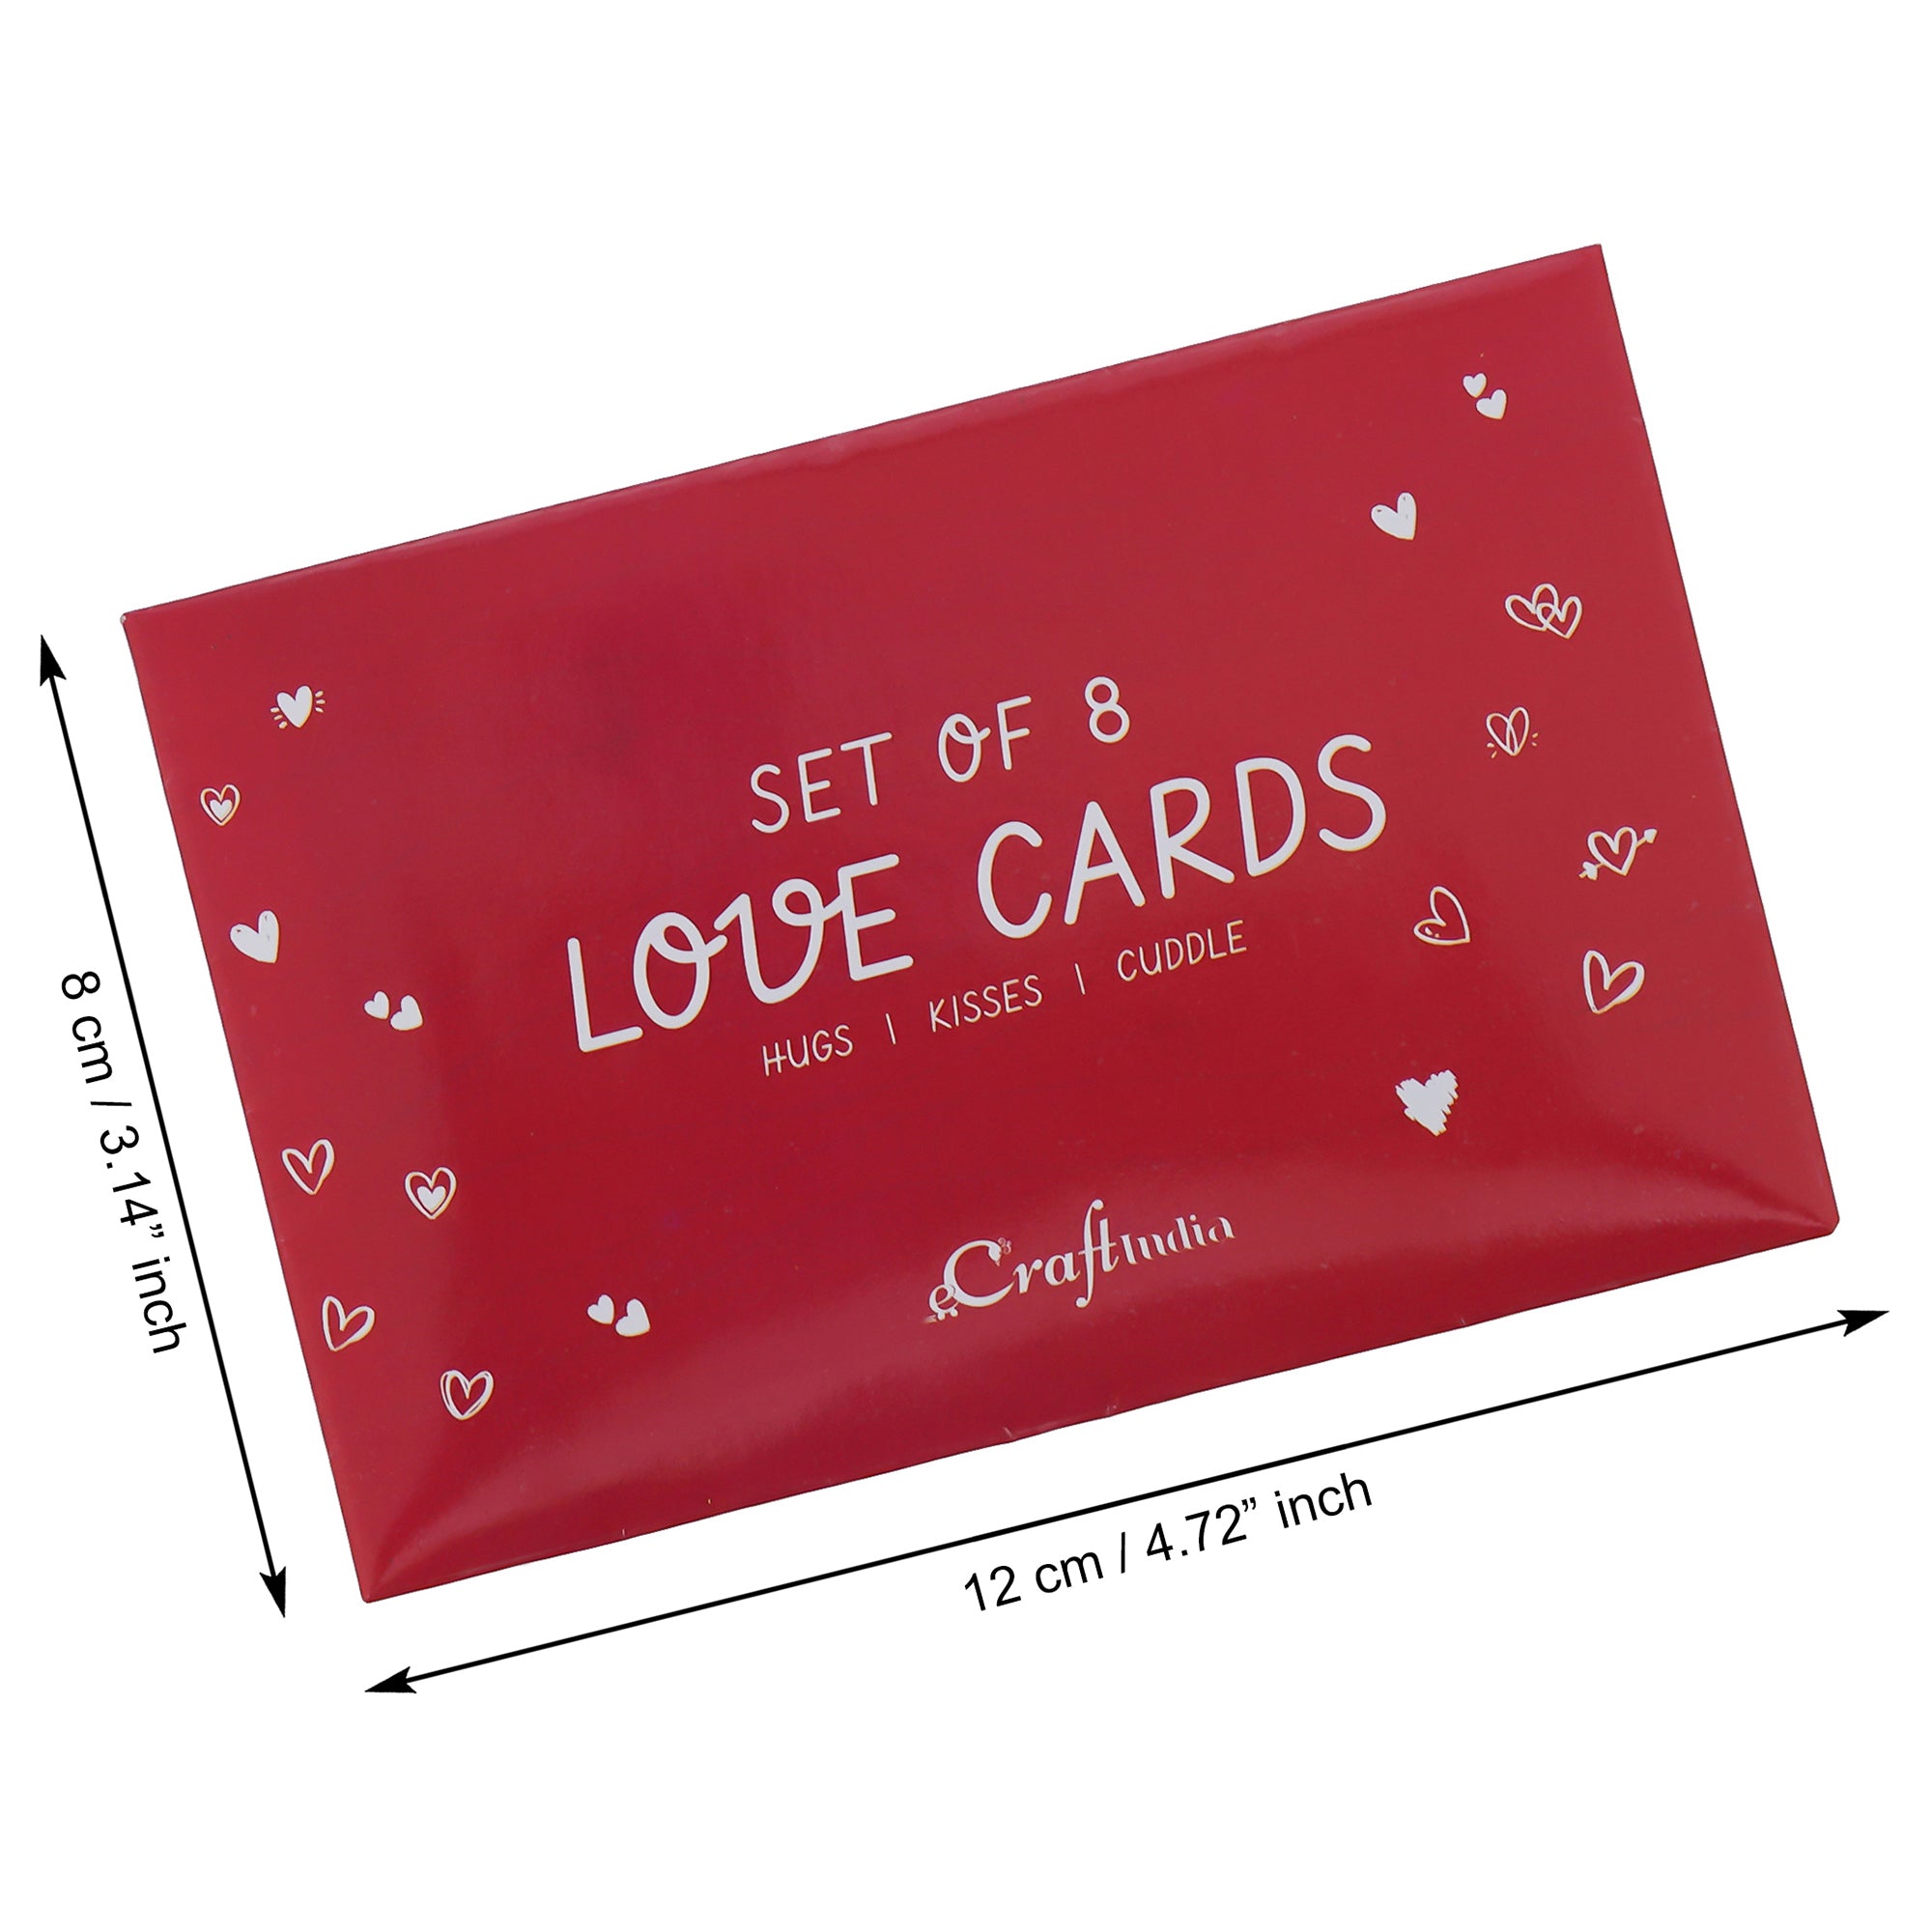 Valentine Combo of Pack of 8 Love Gift Cards, Red Gift Box with Teddy & Roses, Hands Showcasing Red Heart Gift Set 2